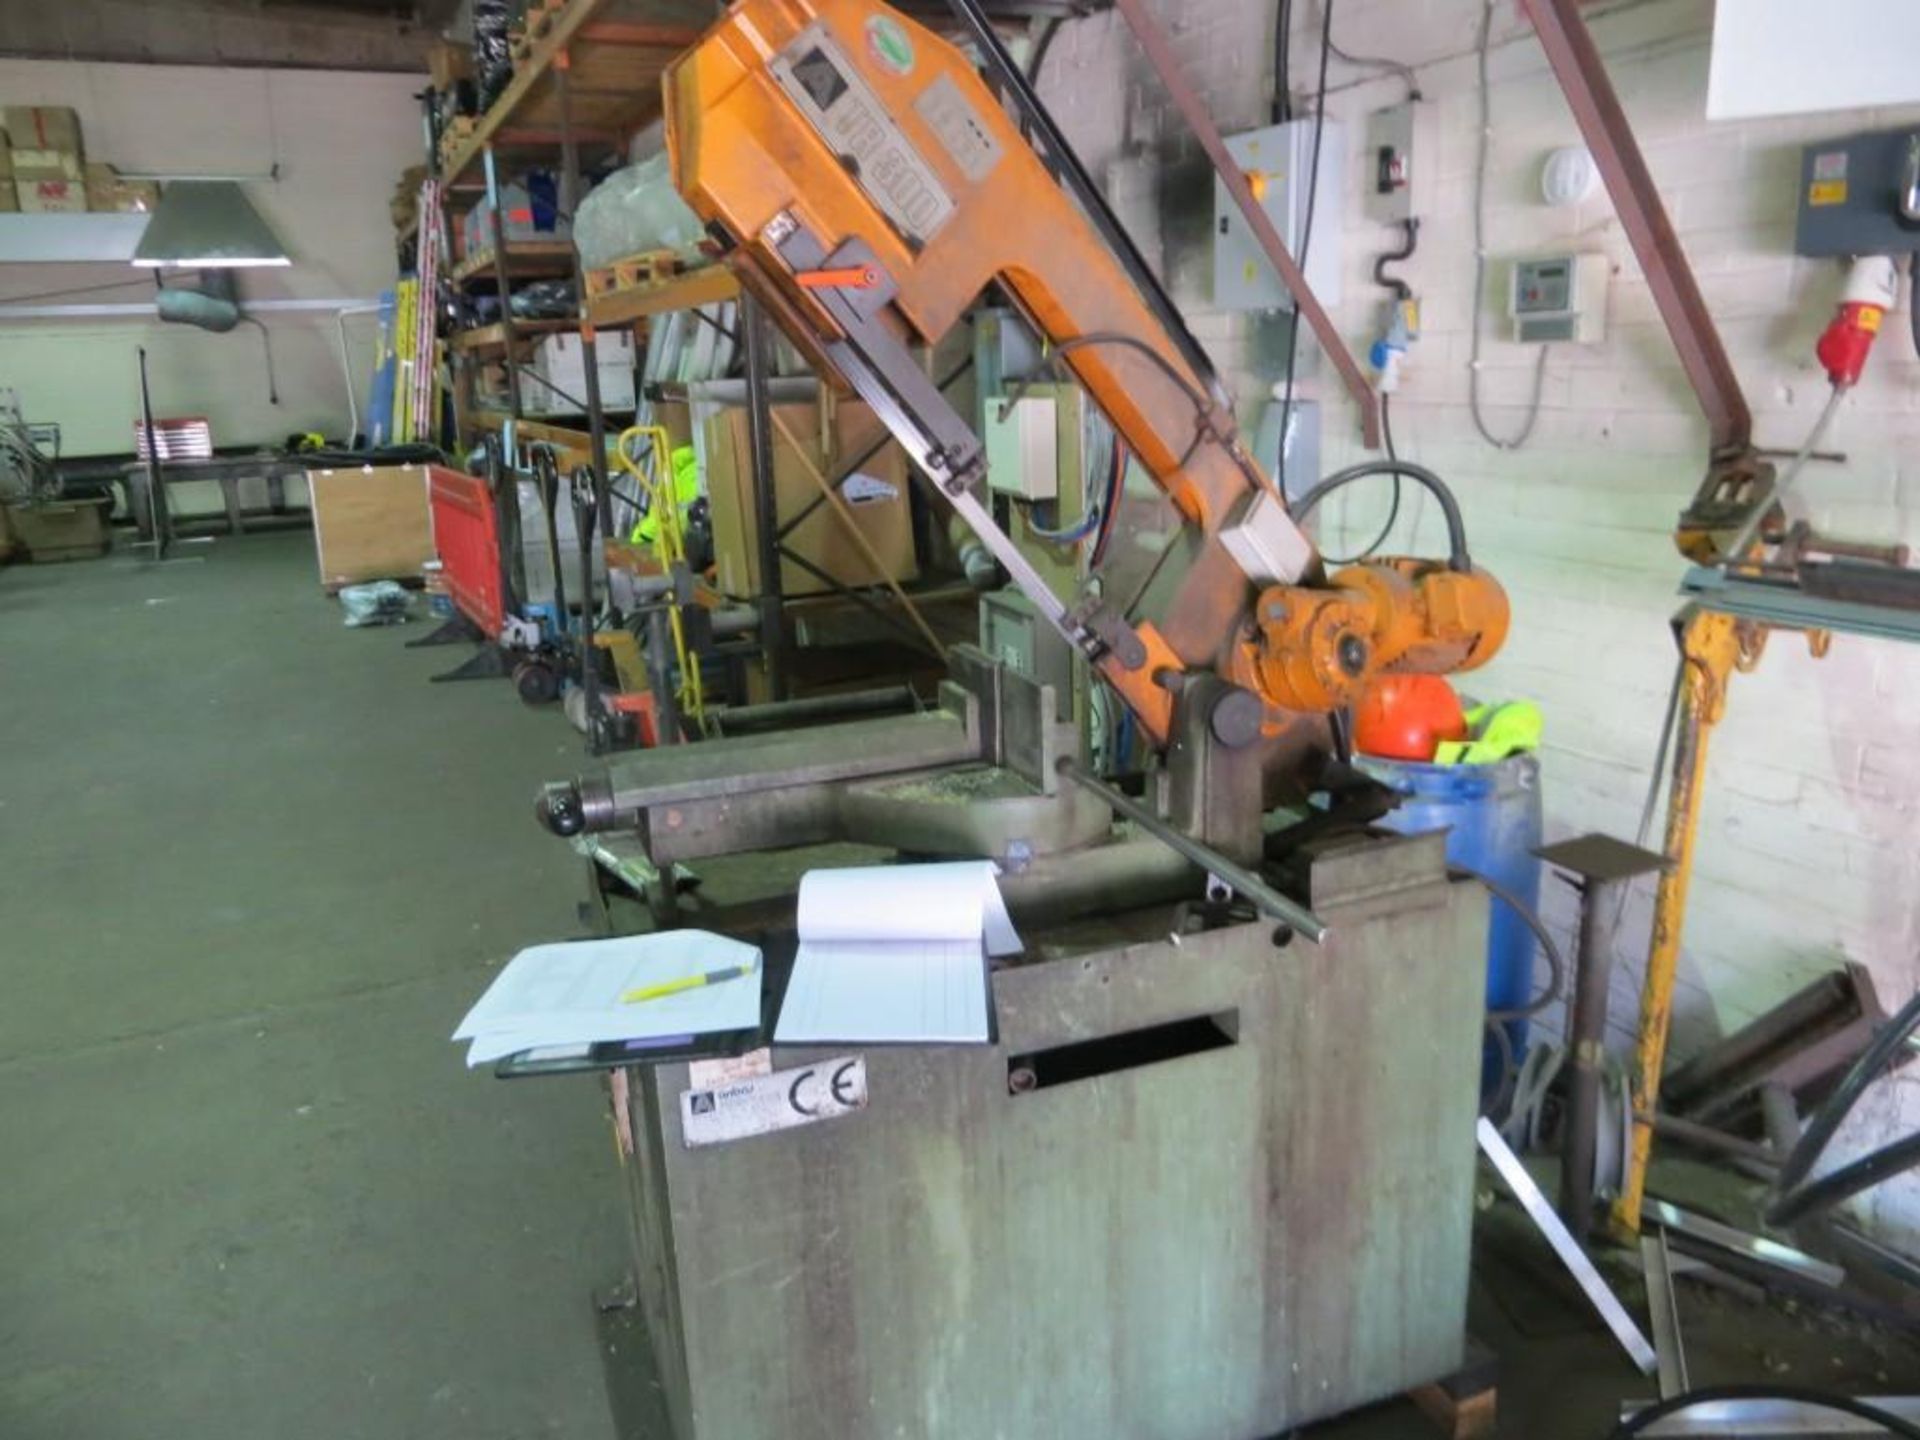 Alligator TR300M band saw / donkey saw Serial No. 316661 c/w two free standing roller feeders - Image 2 of 7